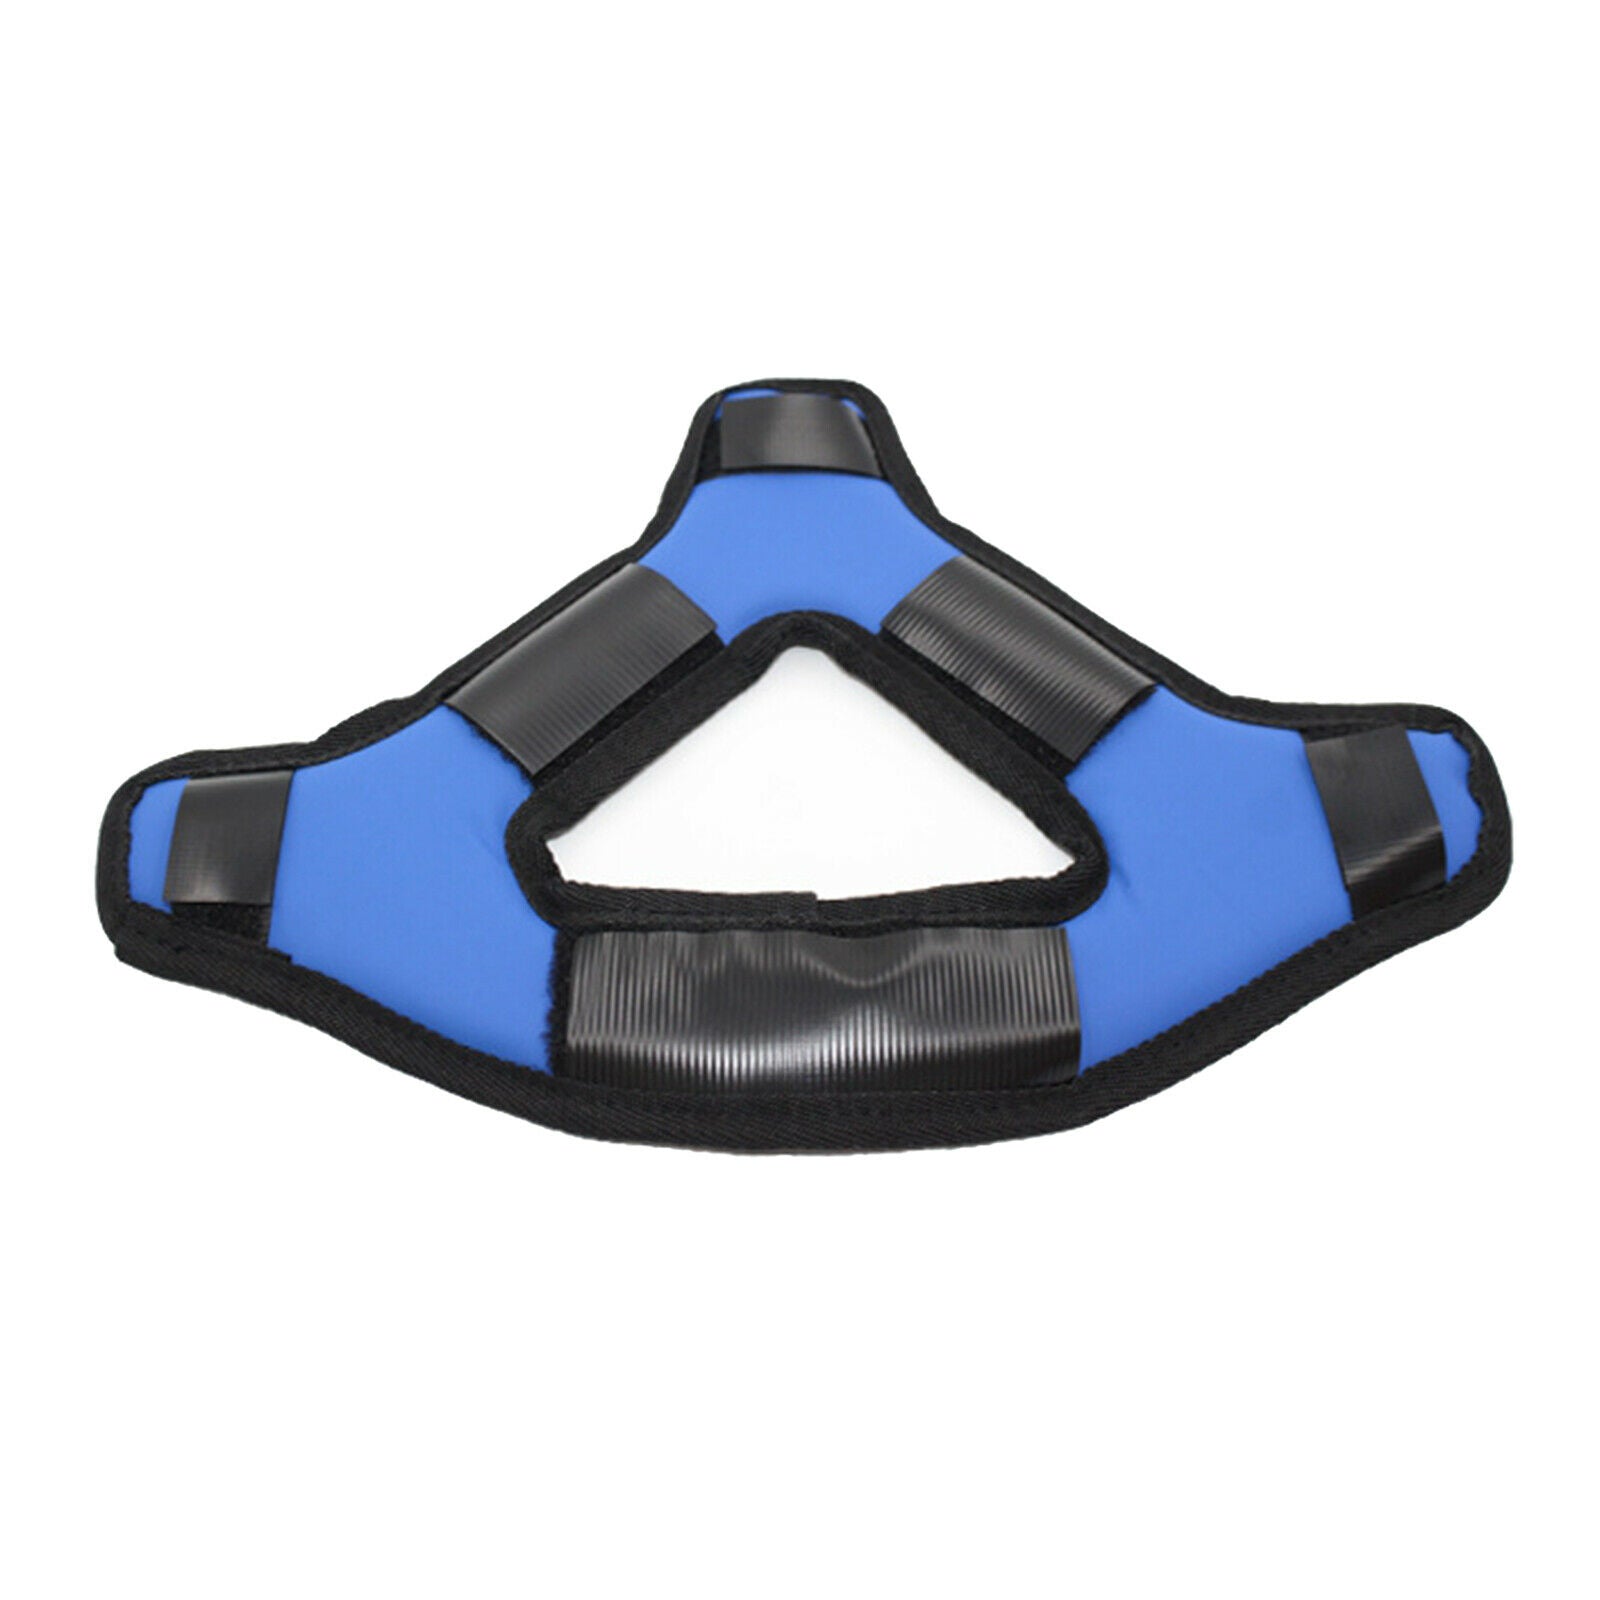 Easy Install Head Strap Pad Cushion Headband Fixing for   Quest2 Blue